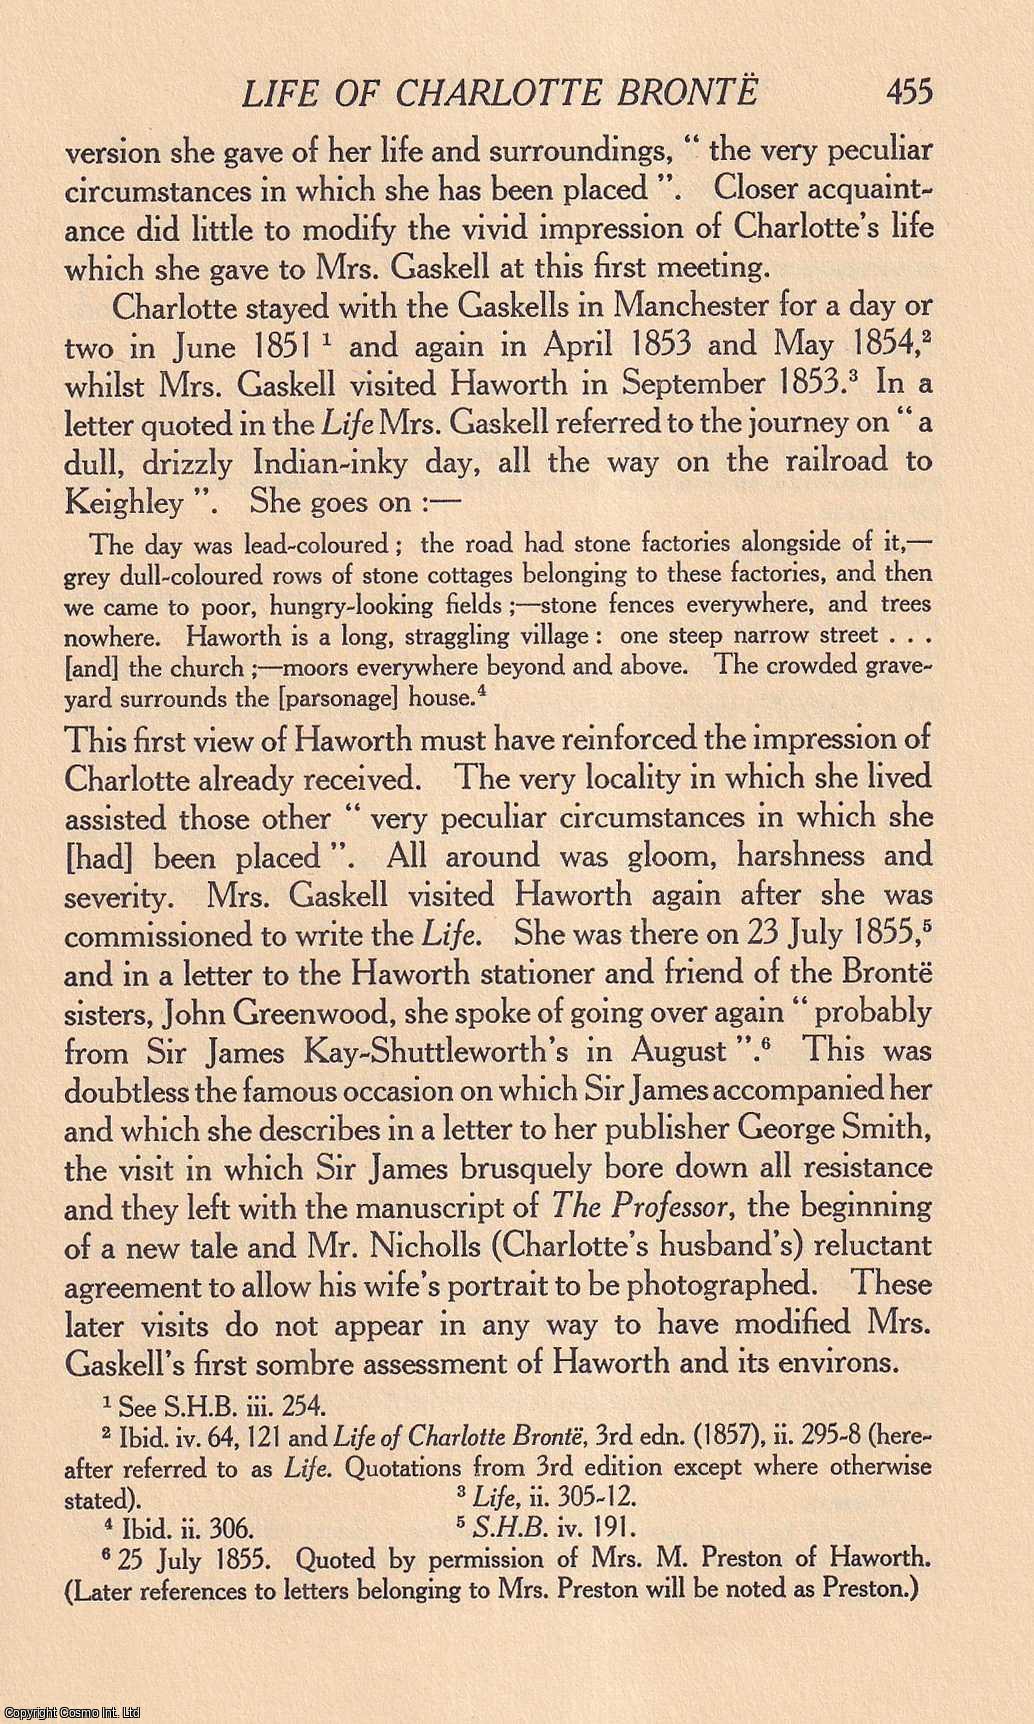 Arthur Pollard and Albert H. Preston - Mrs Gaskell's Life of Charlotte Bronte. With An Appendix on Some New Gaskell Letters. An original article from the Bulletin of the John Rylands Library Manchester, 1965.